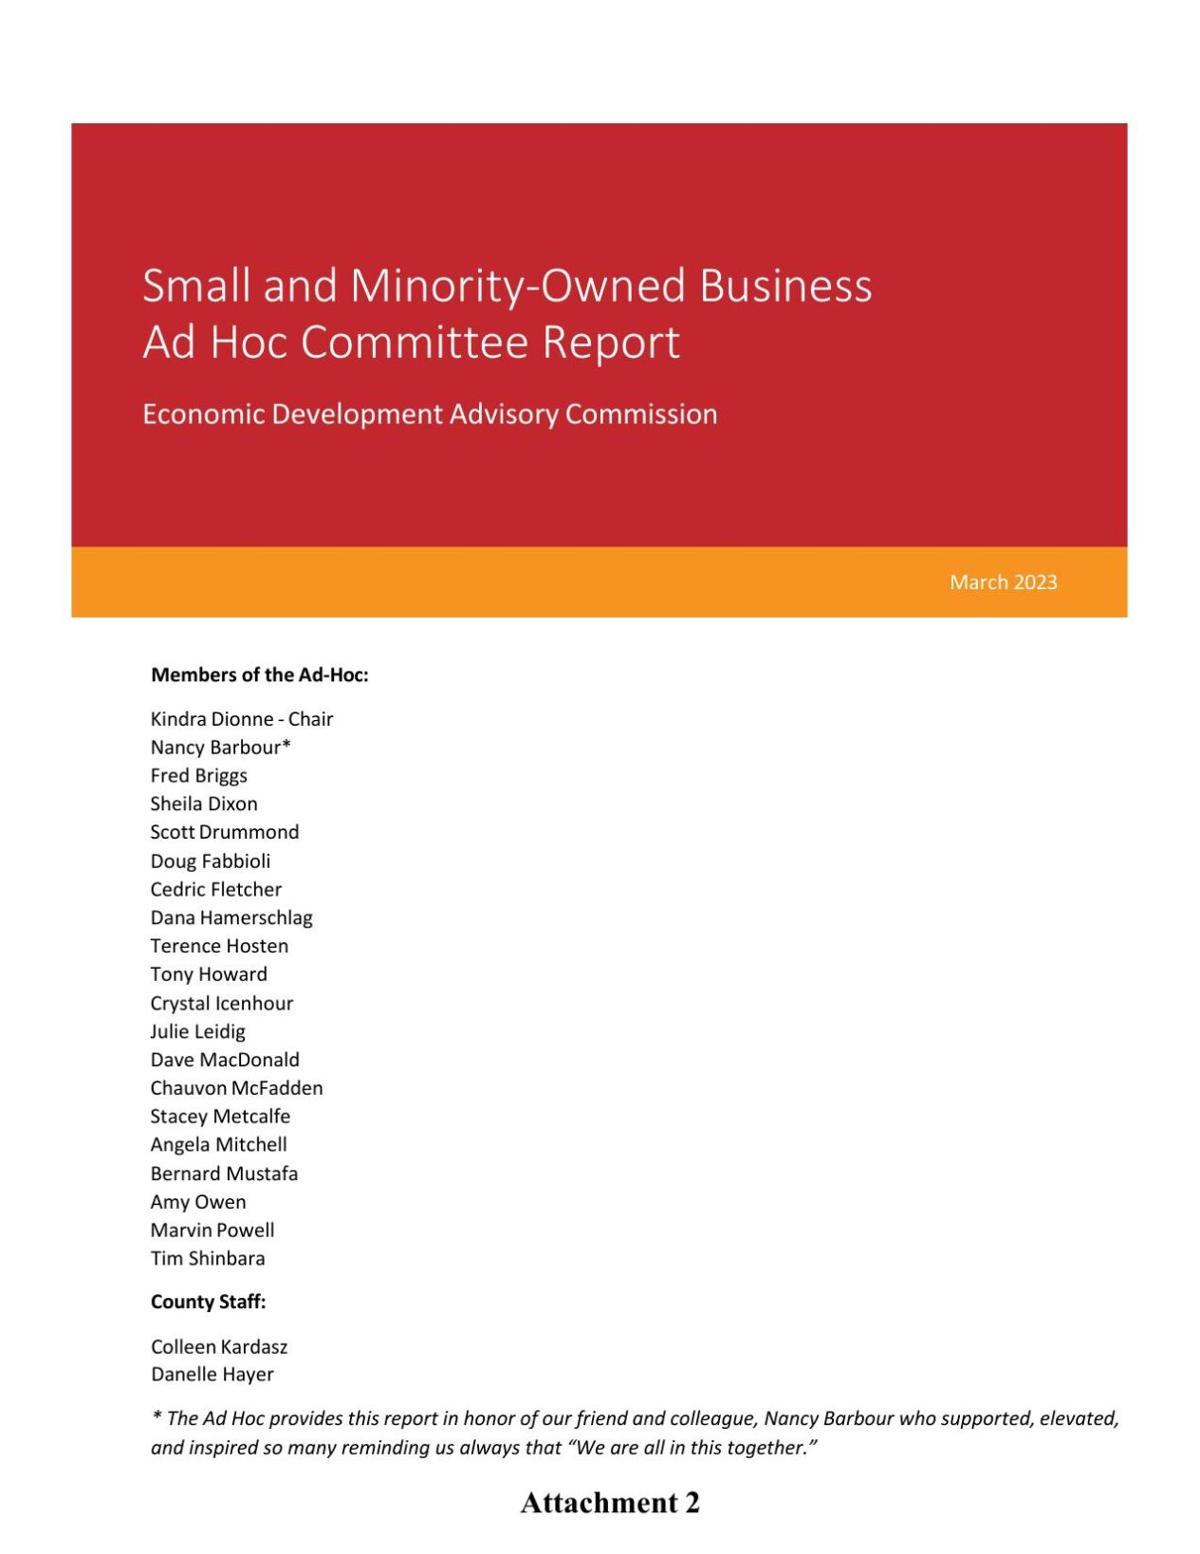 2023_03 Small and Minority-Owned Business Ad Hoc Committee Report.pdf